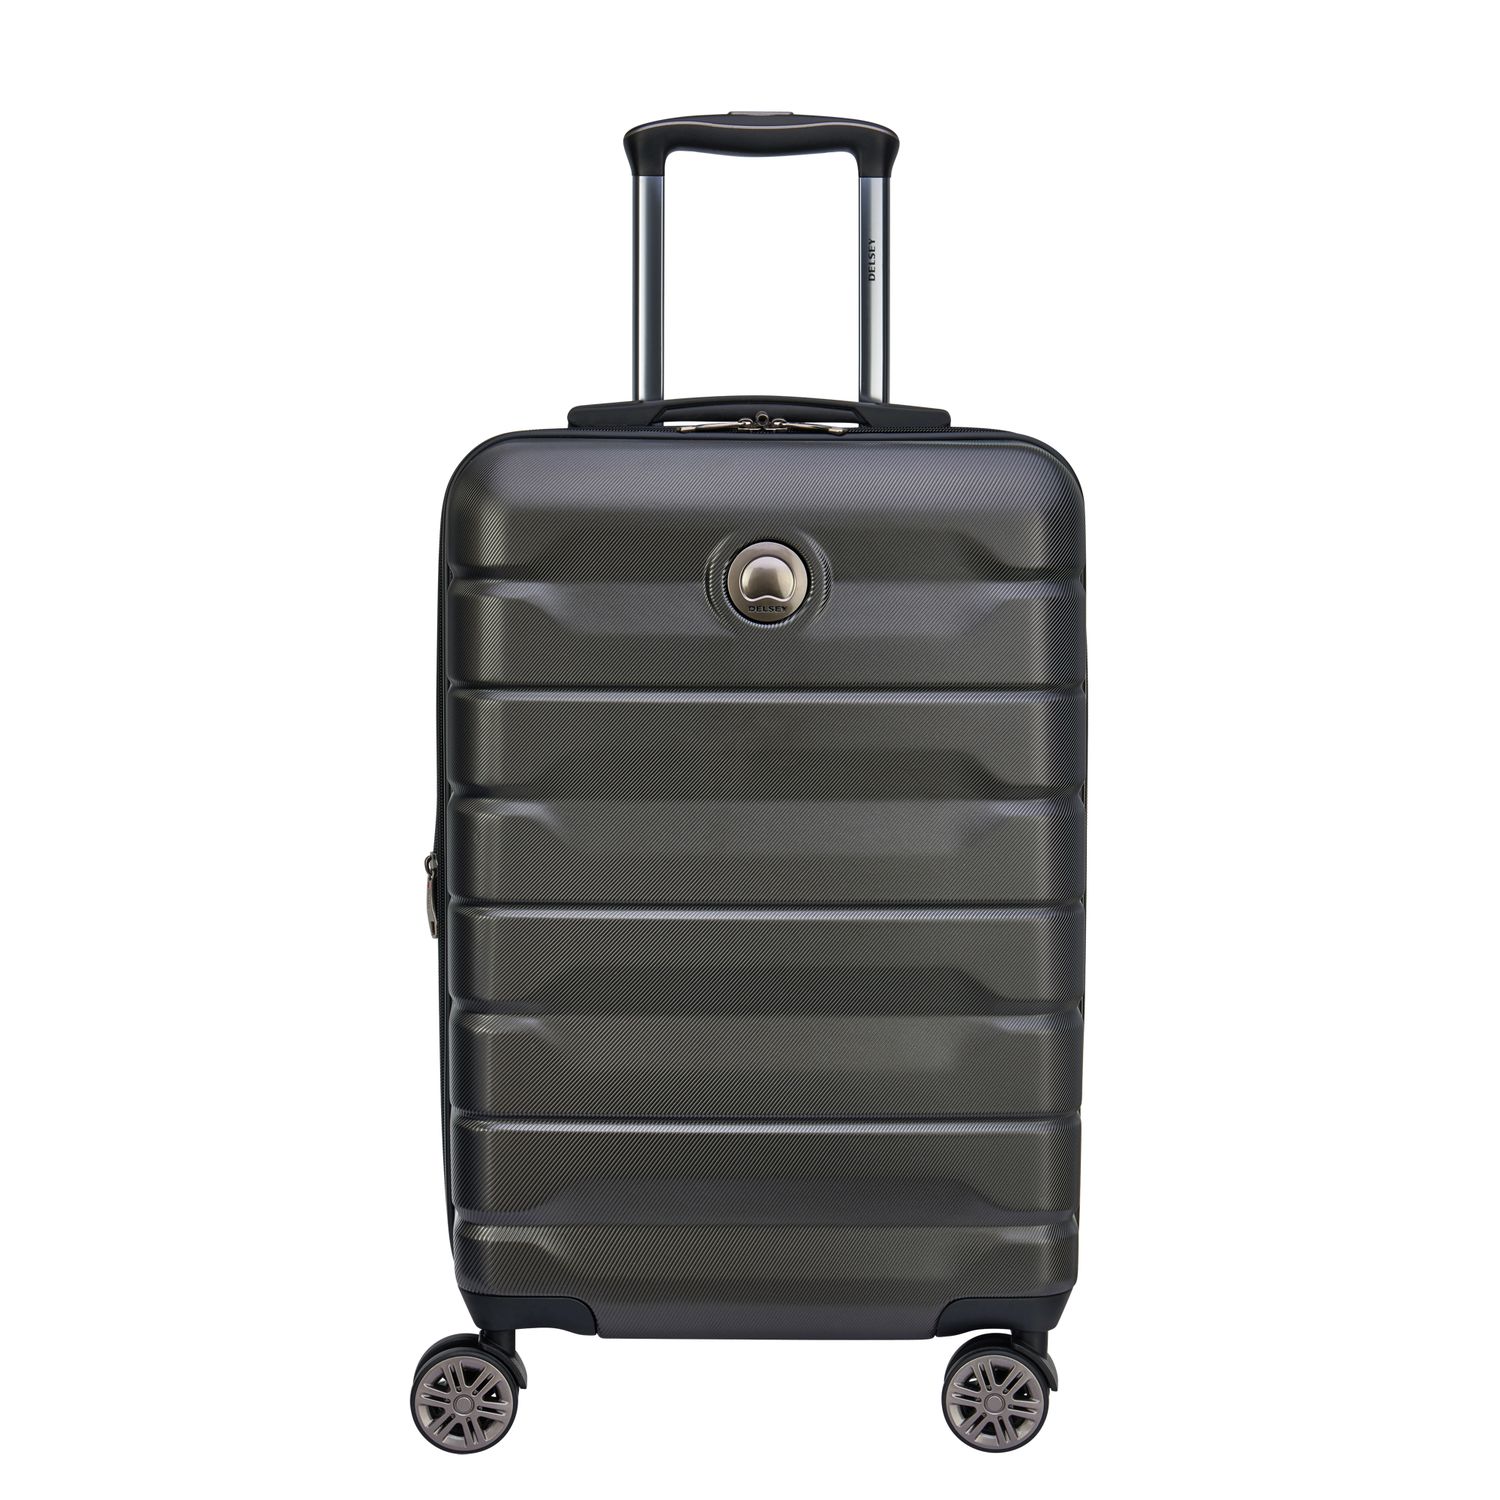 delsey 32 inch luggage